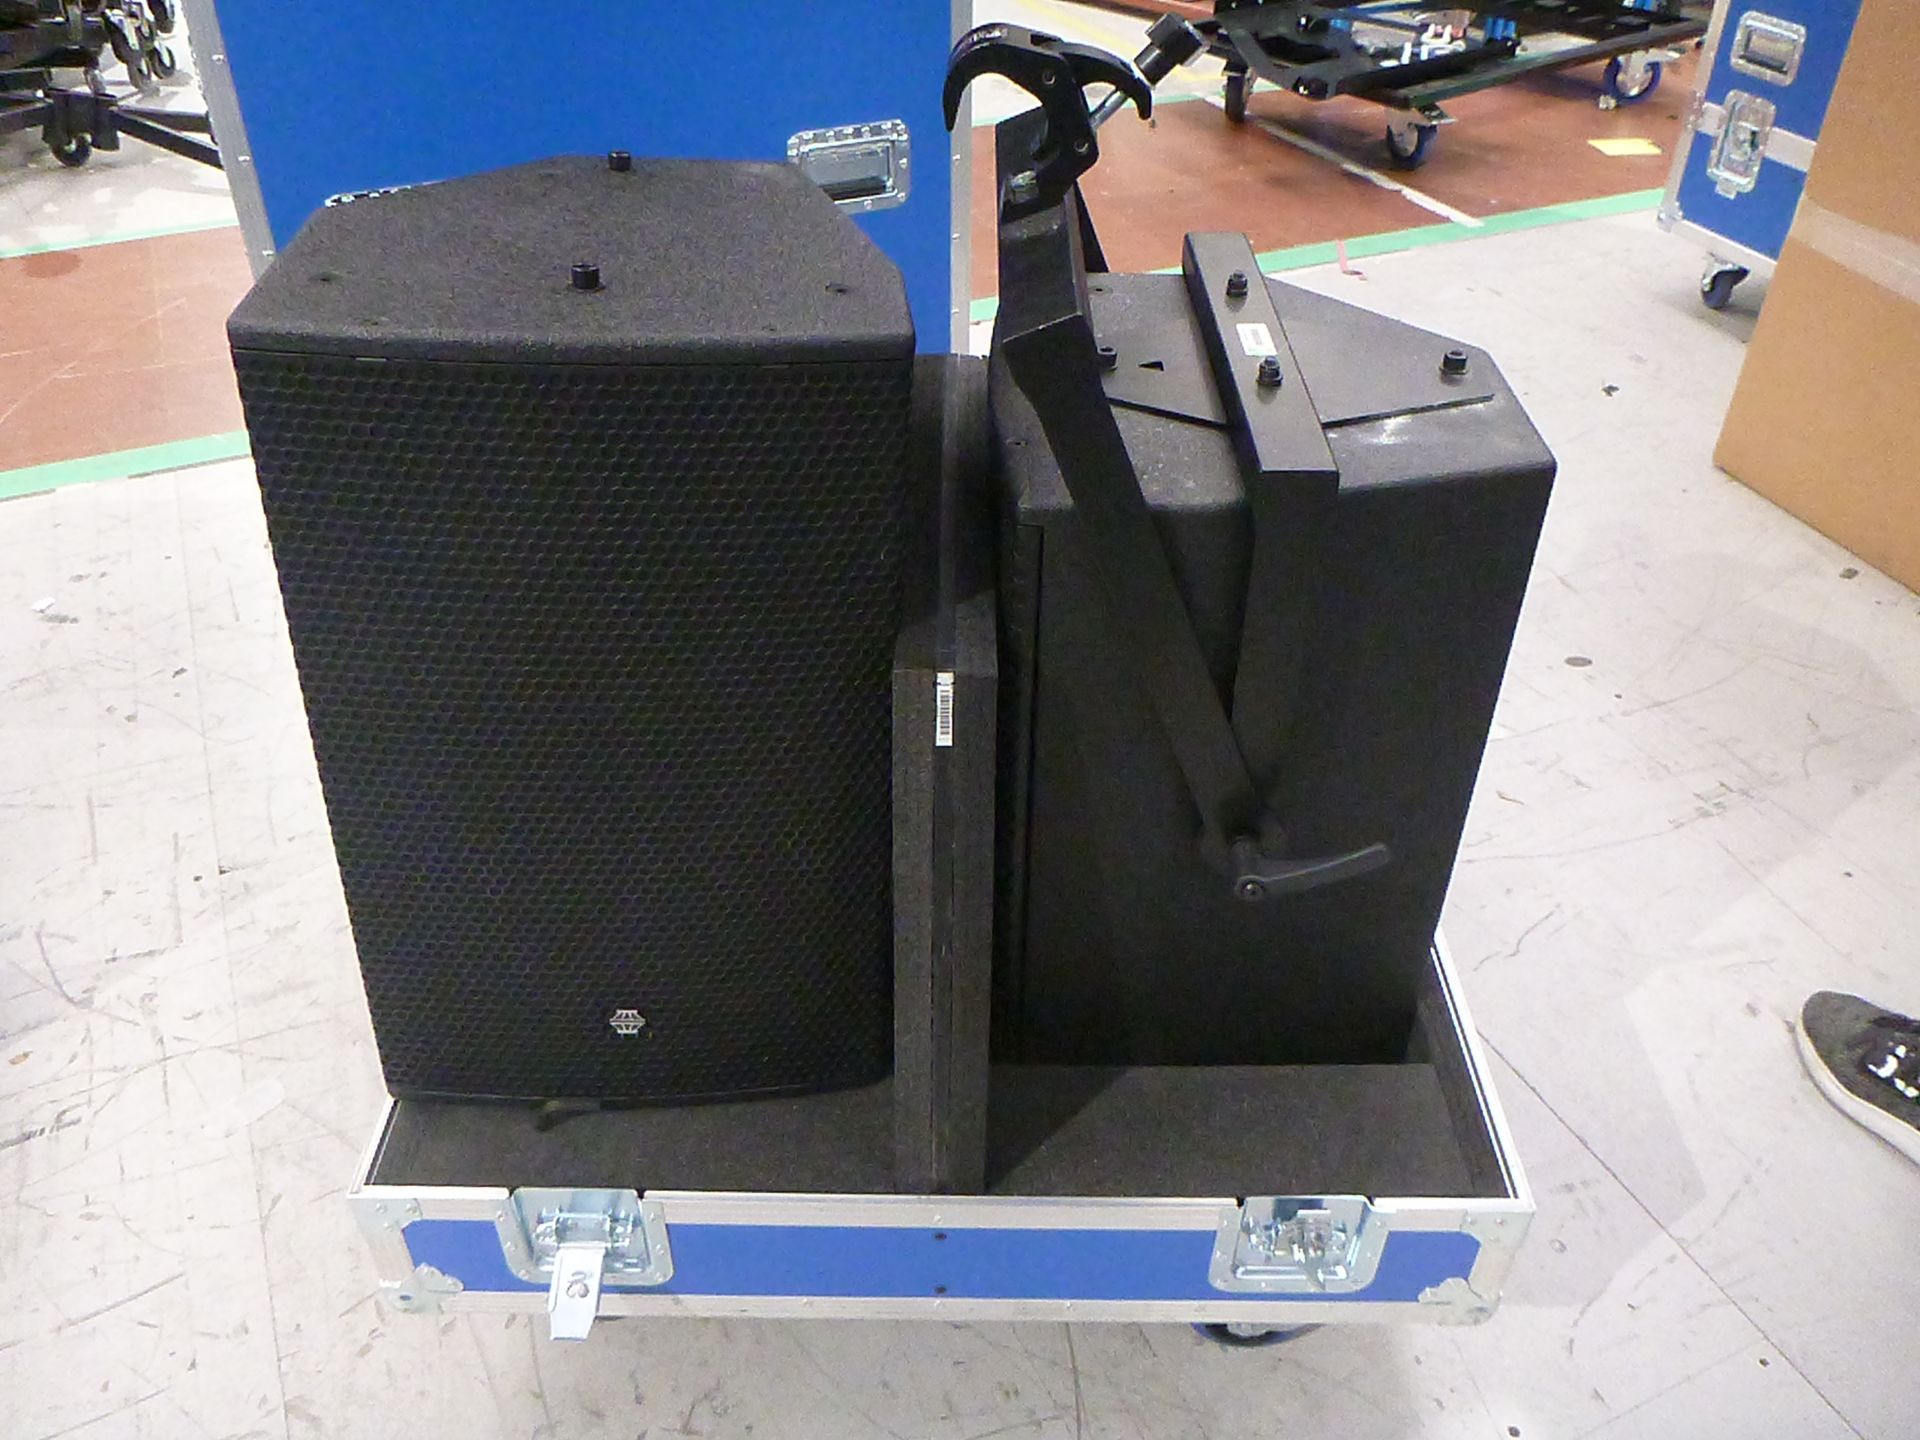 EM Acoustics EMS-129 Wide Dispersion Passive Loudspeakers (Pair) In flight case with 1 x flying